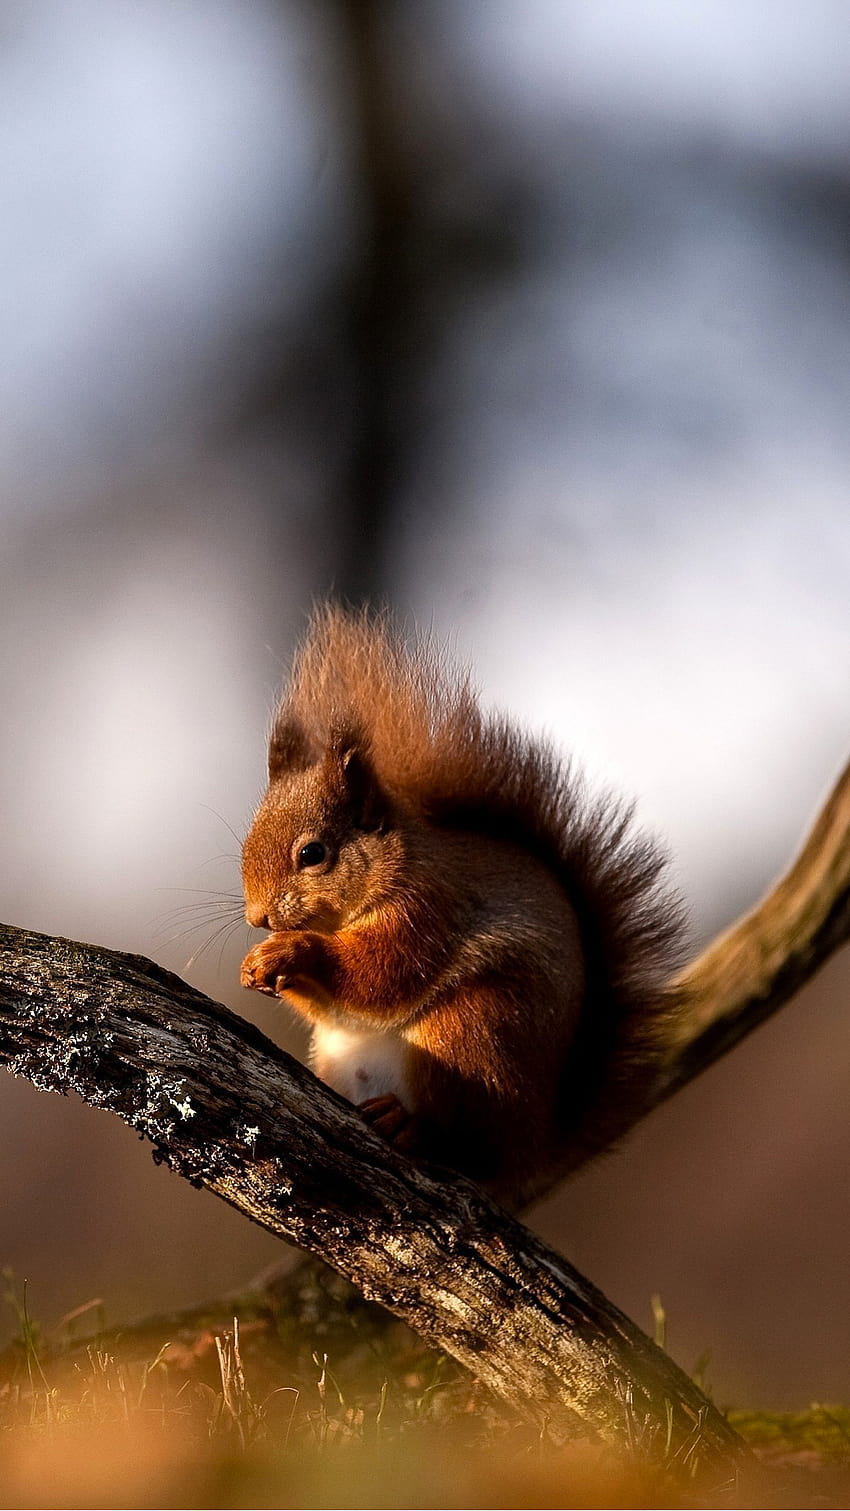 Squirrel 2 for iPhone X, 8, 7, 6, red squirrel HD phone wallpaper